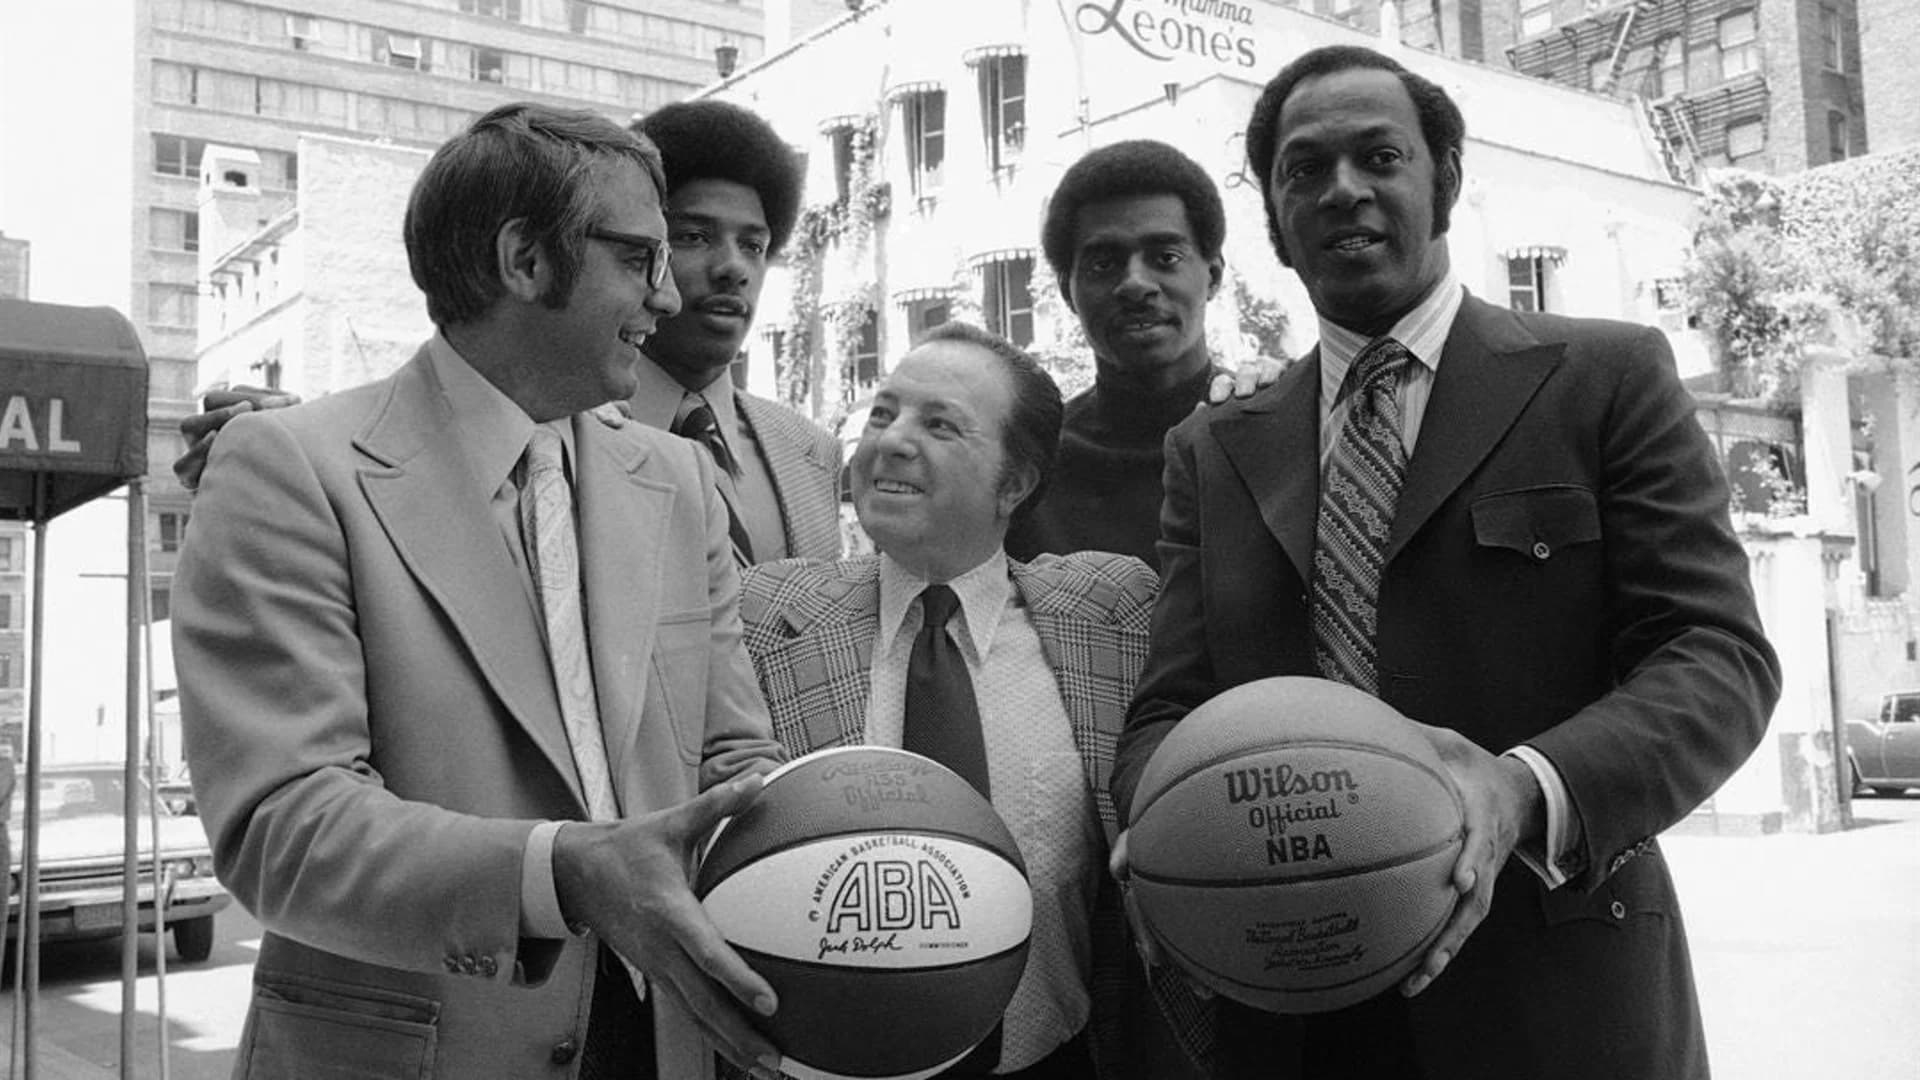 Al Bianchi, 76ers player and NBA coach, exec, dies at 87